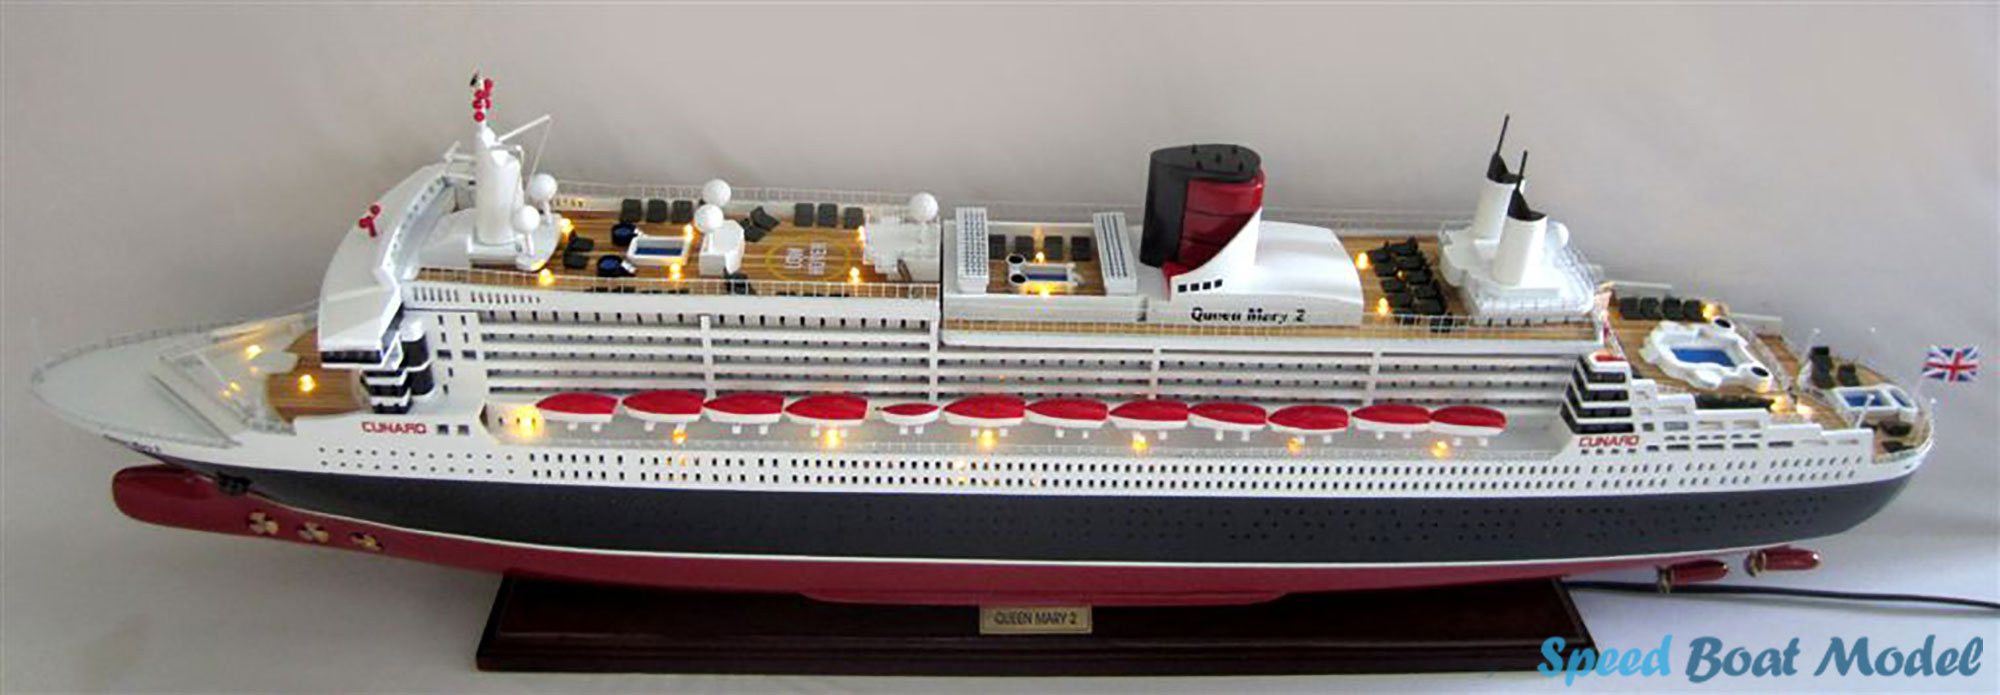 Queen Mary 2 Cruise Ship Model With Lights 39.3"